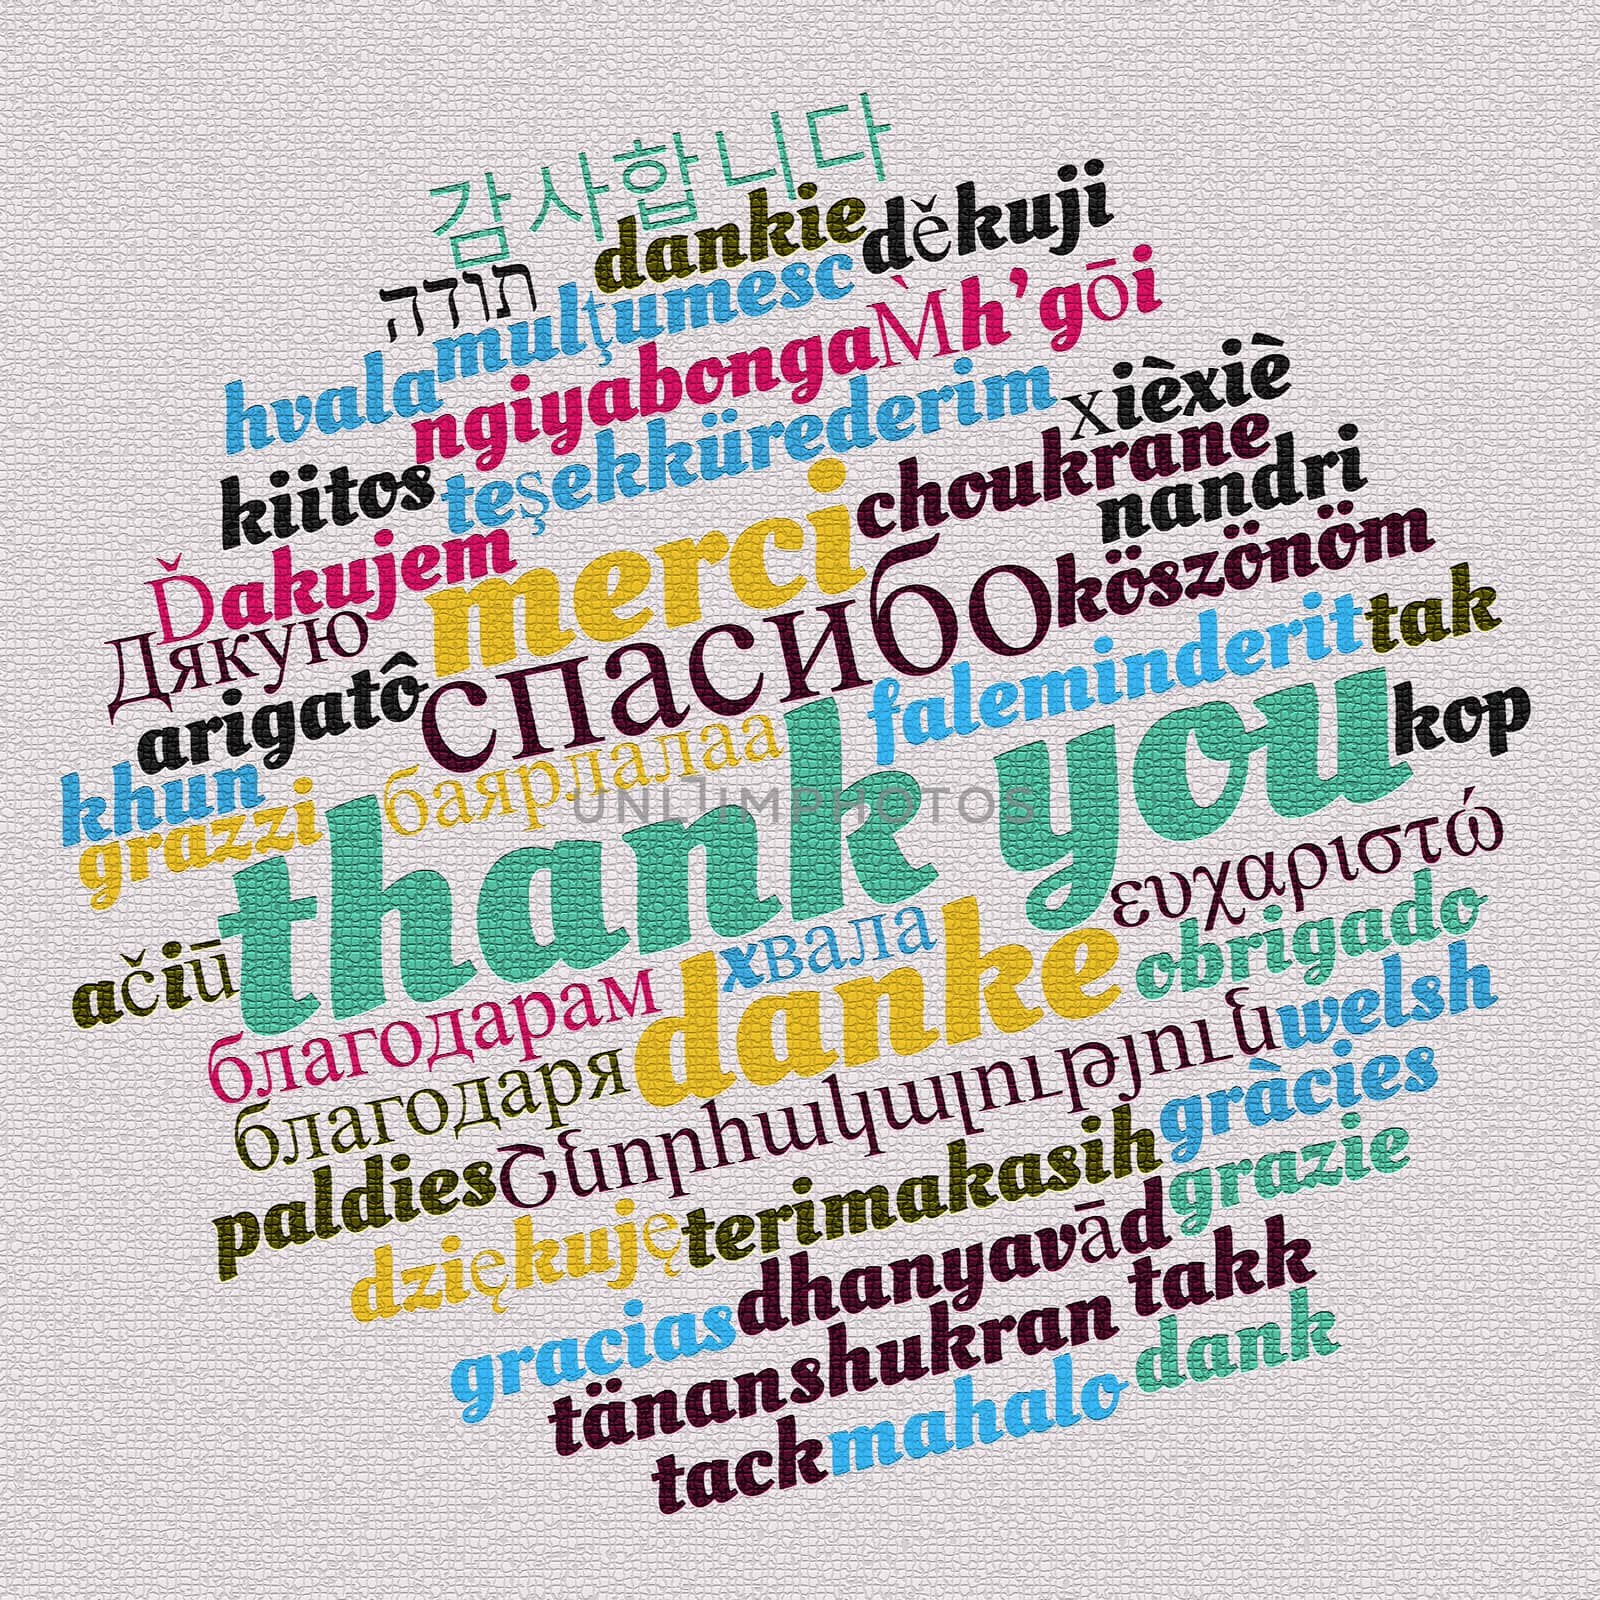 Thank you word cloud concept by eenevski